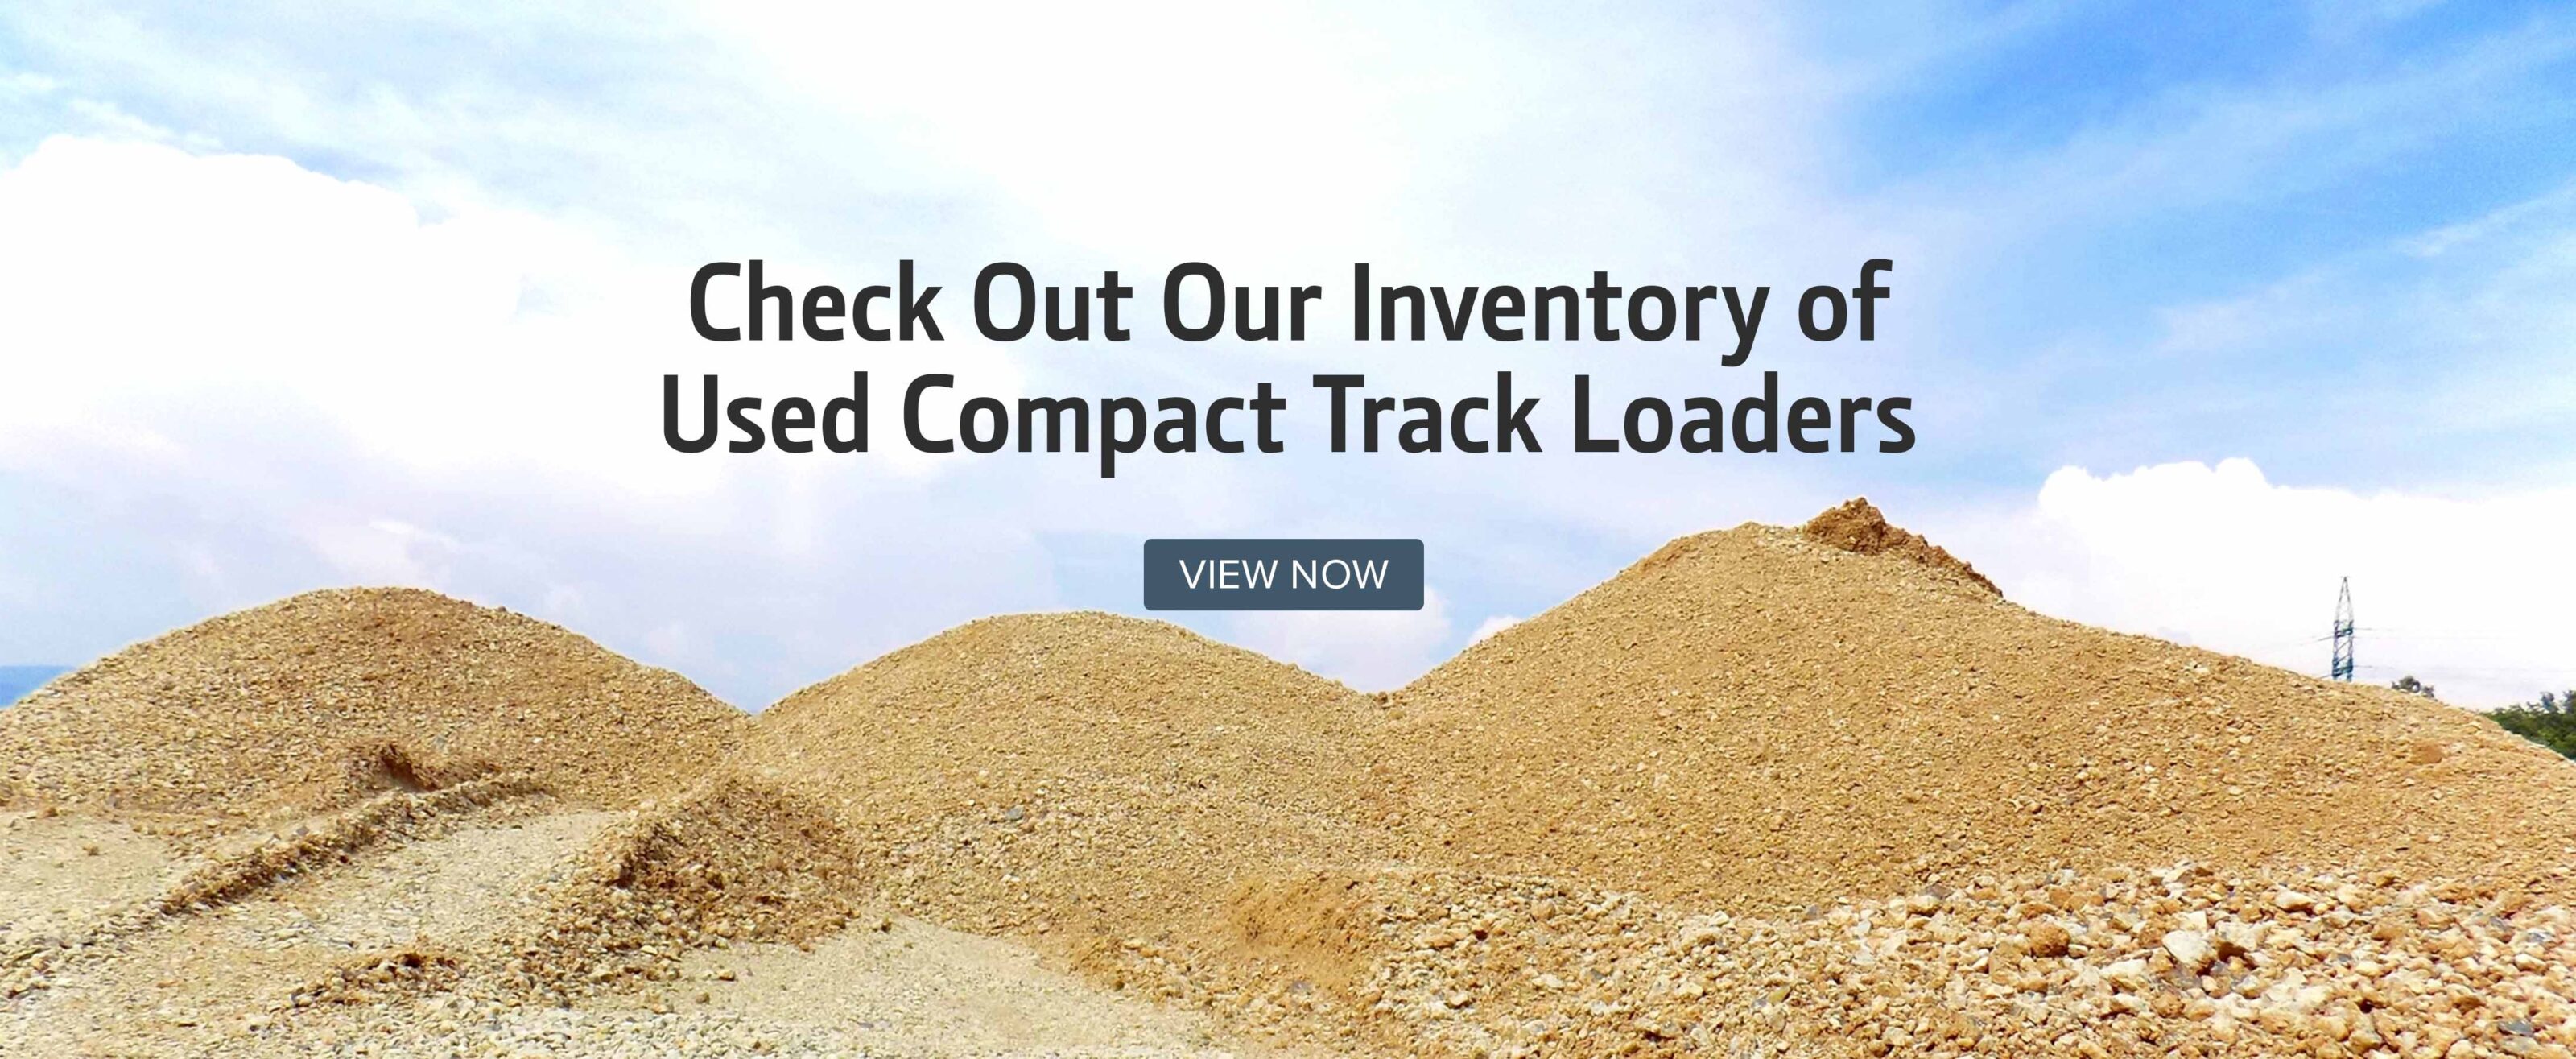 Check Out Our Inventory of Used Compact Track Loaders